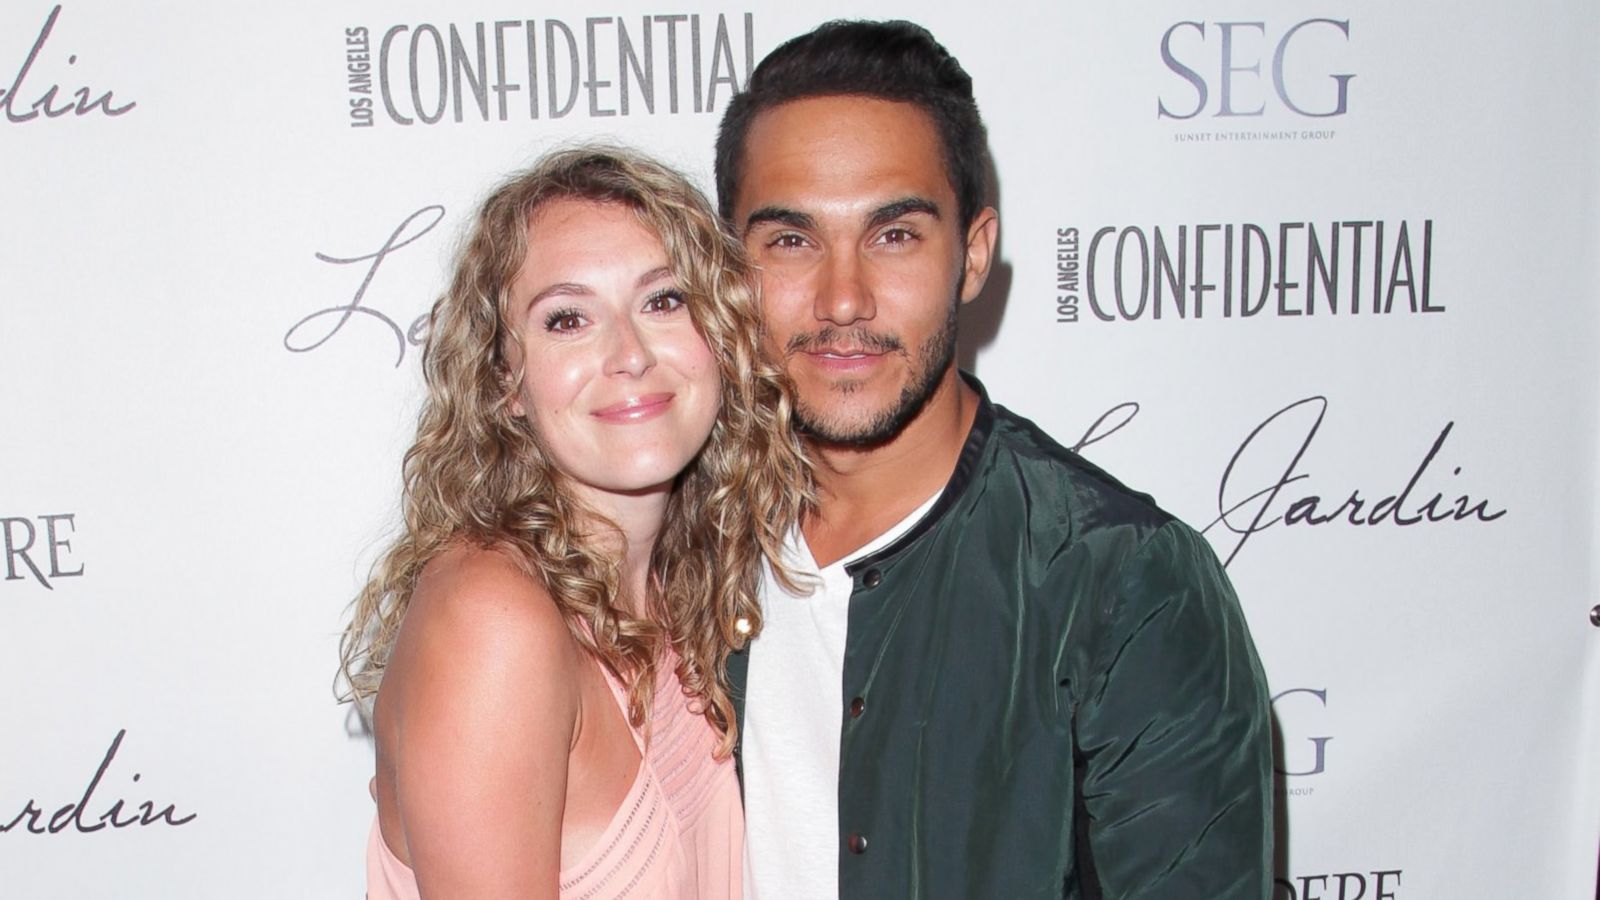 Dancing With the Stars' Season Alexa and Carlos PenaVega Join the Celebrity Cast - ABC News